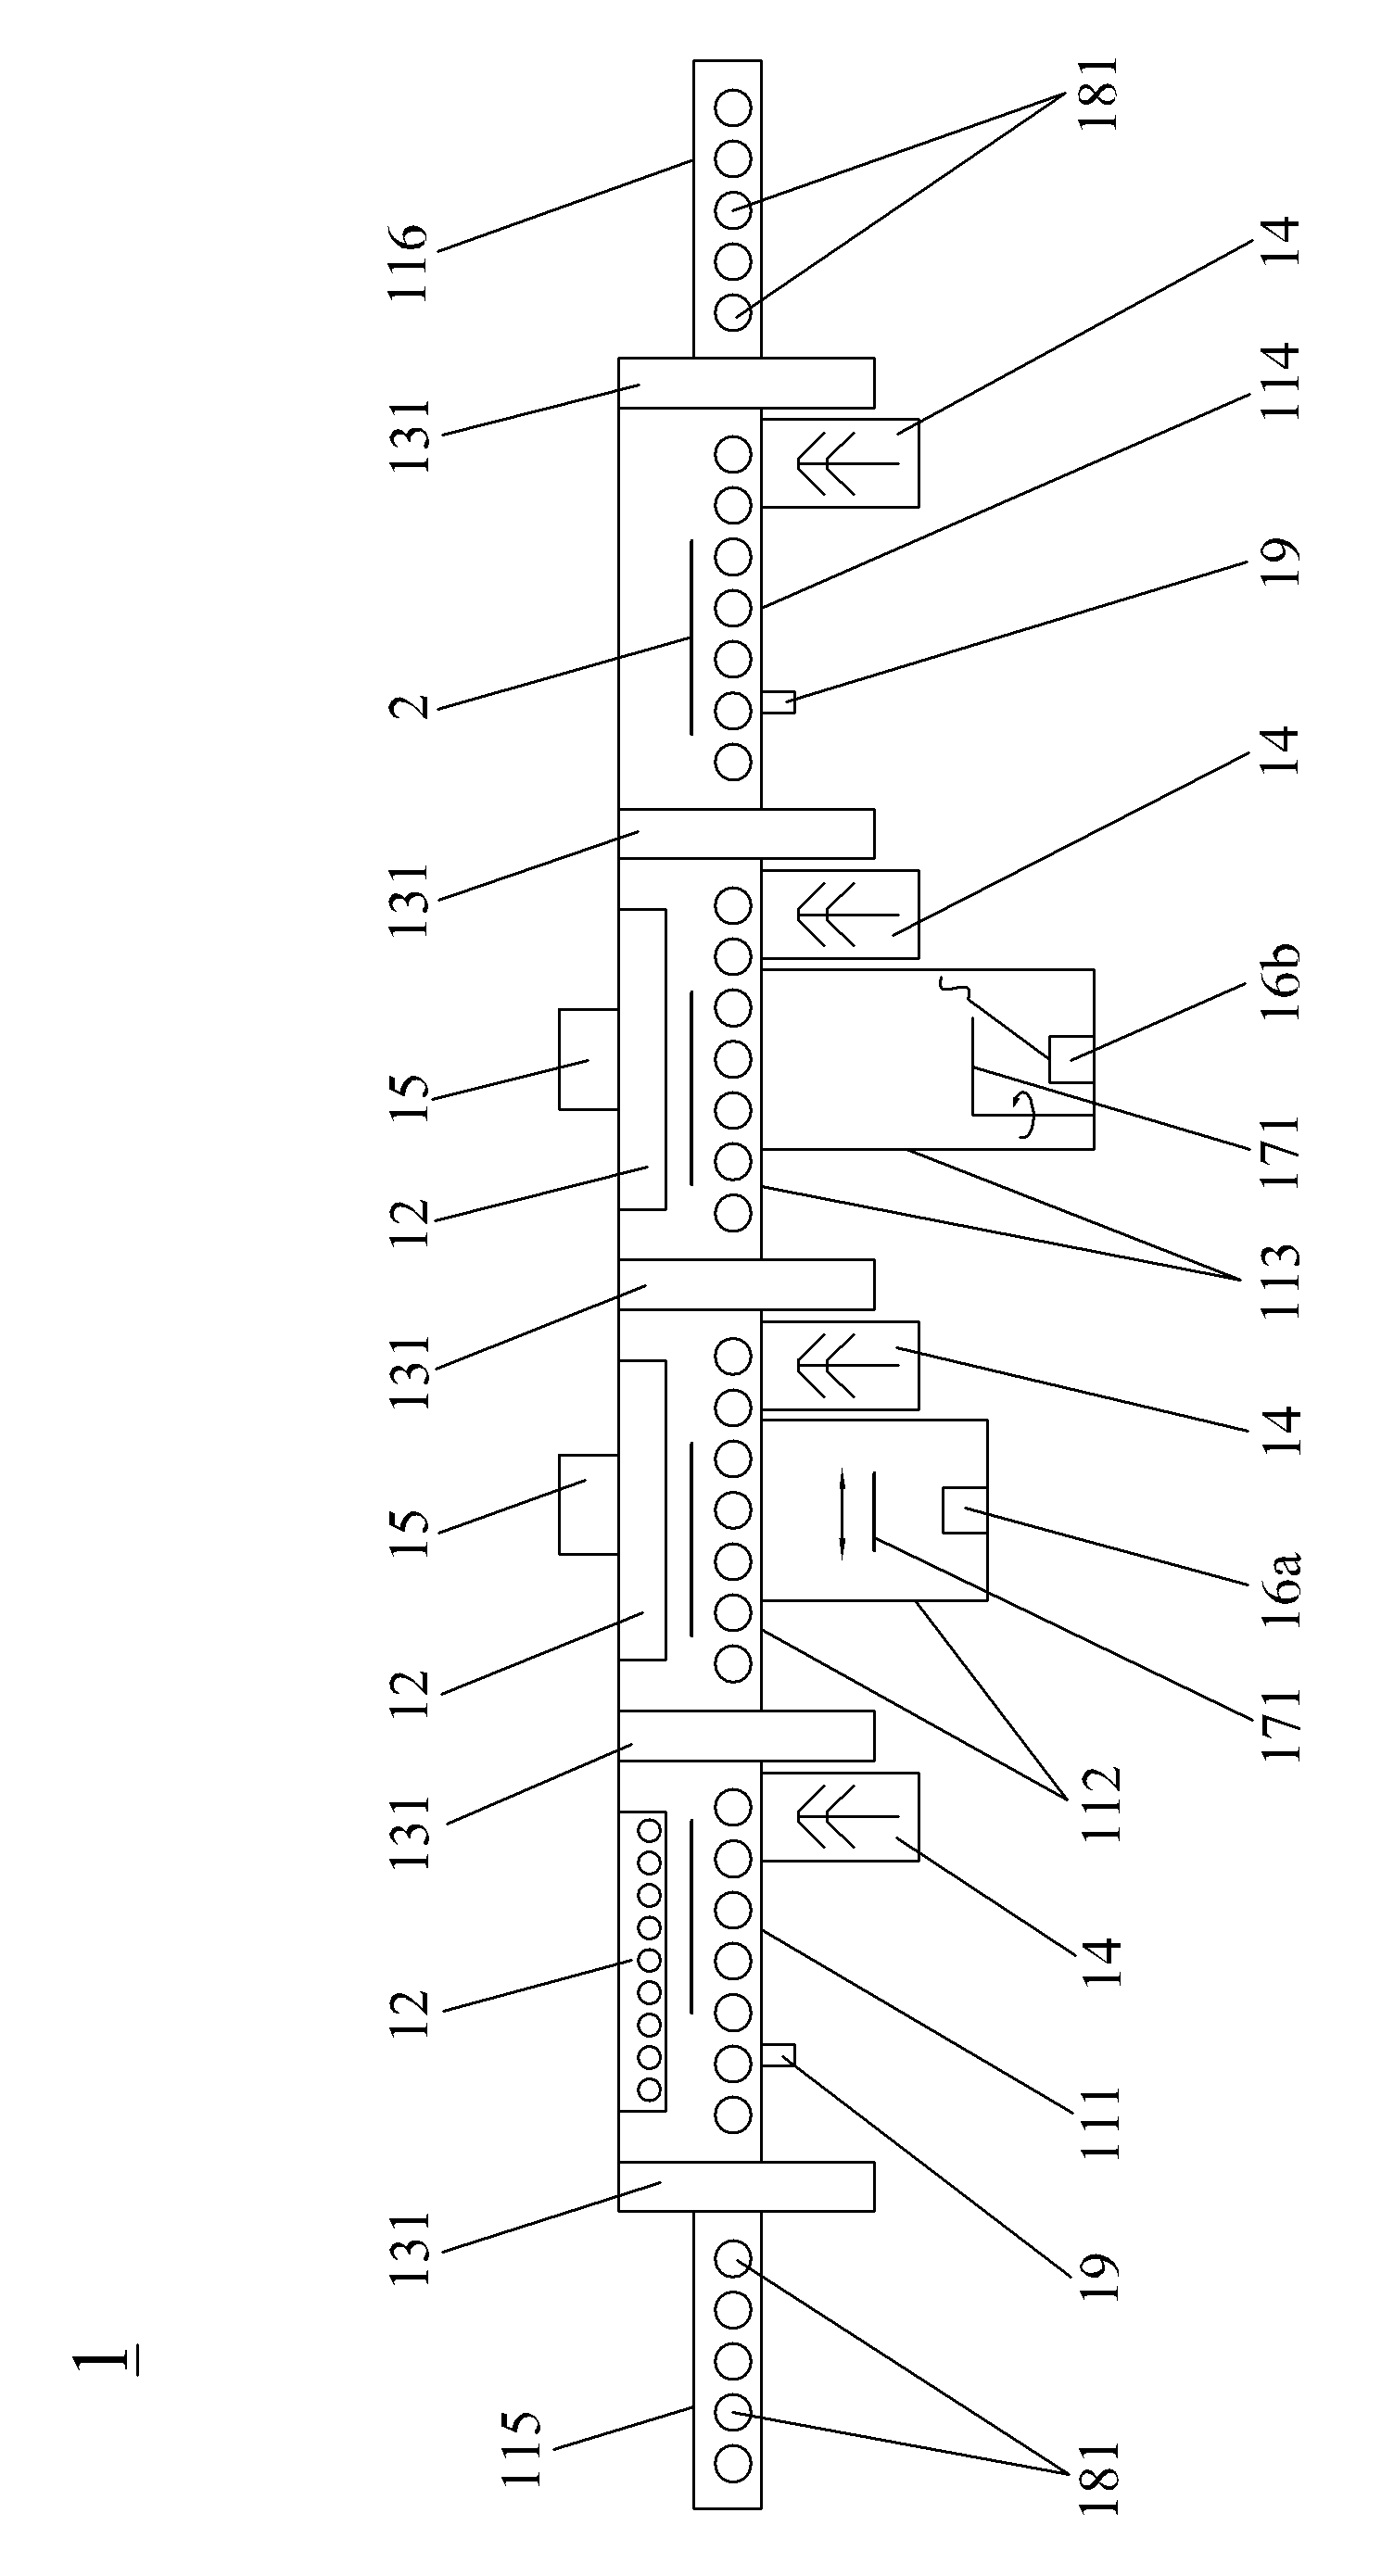 Substrate film-coating processing system